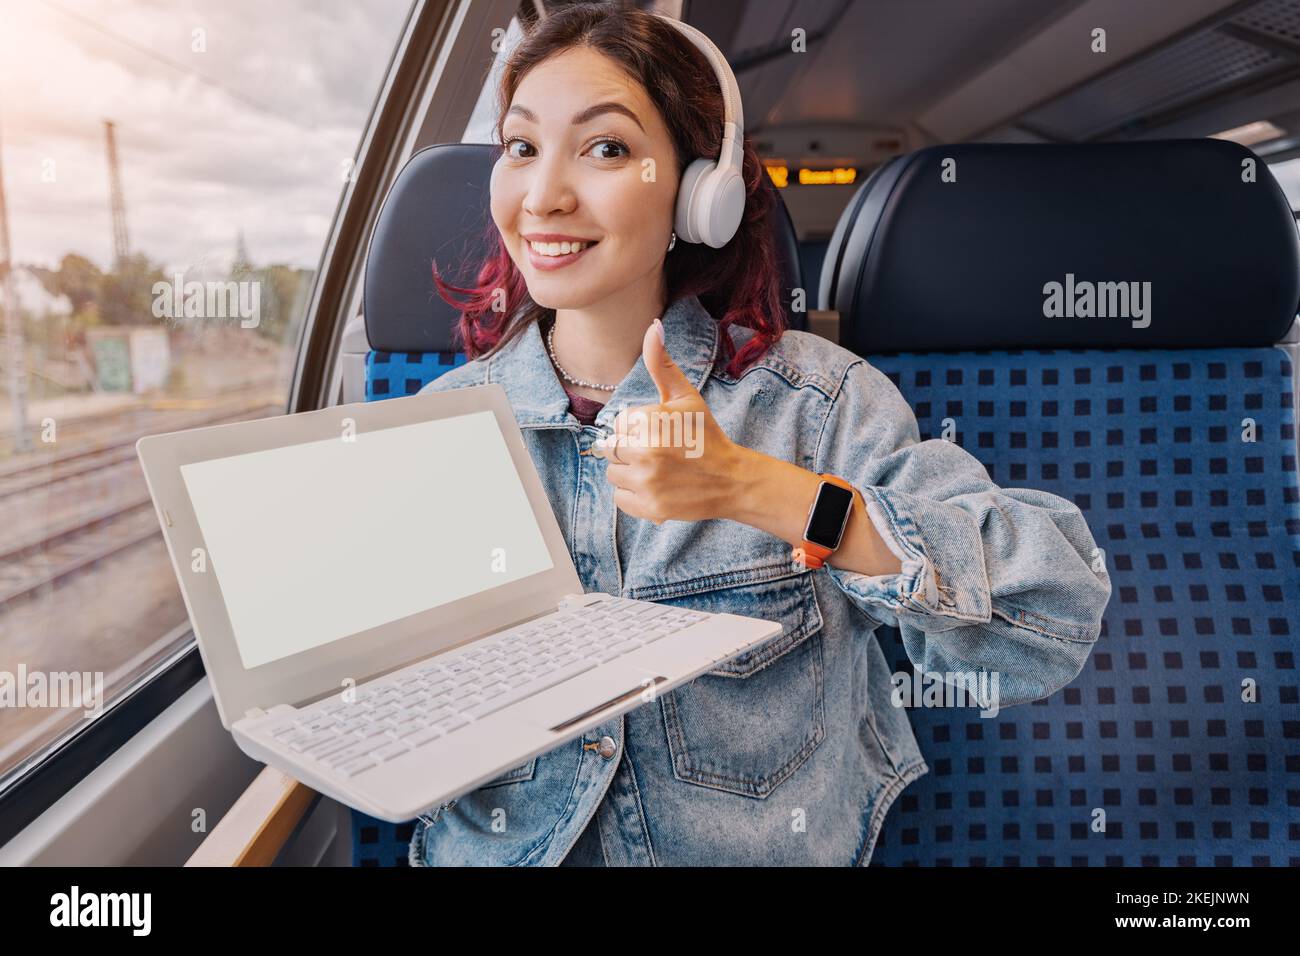 Happy young girl rides in a modern intercity train and shows white screen of her laptop. Work remotely via Wi-Fi Internet or study or watch a movie Stock Photo